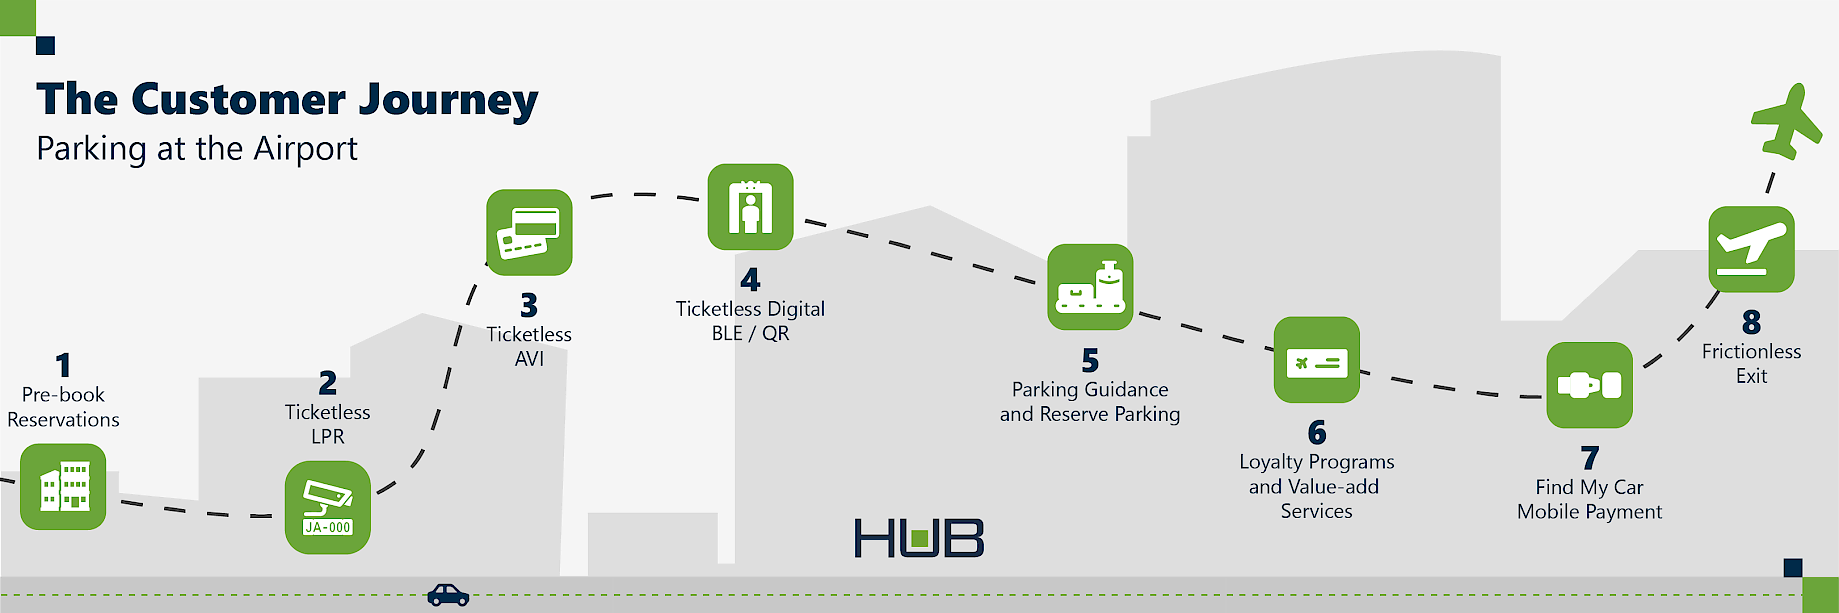 the entire customer journey at the airport as proposed by HUB Parking 